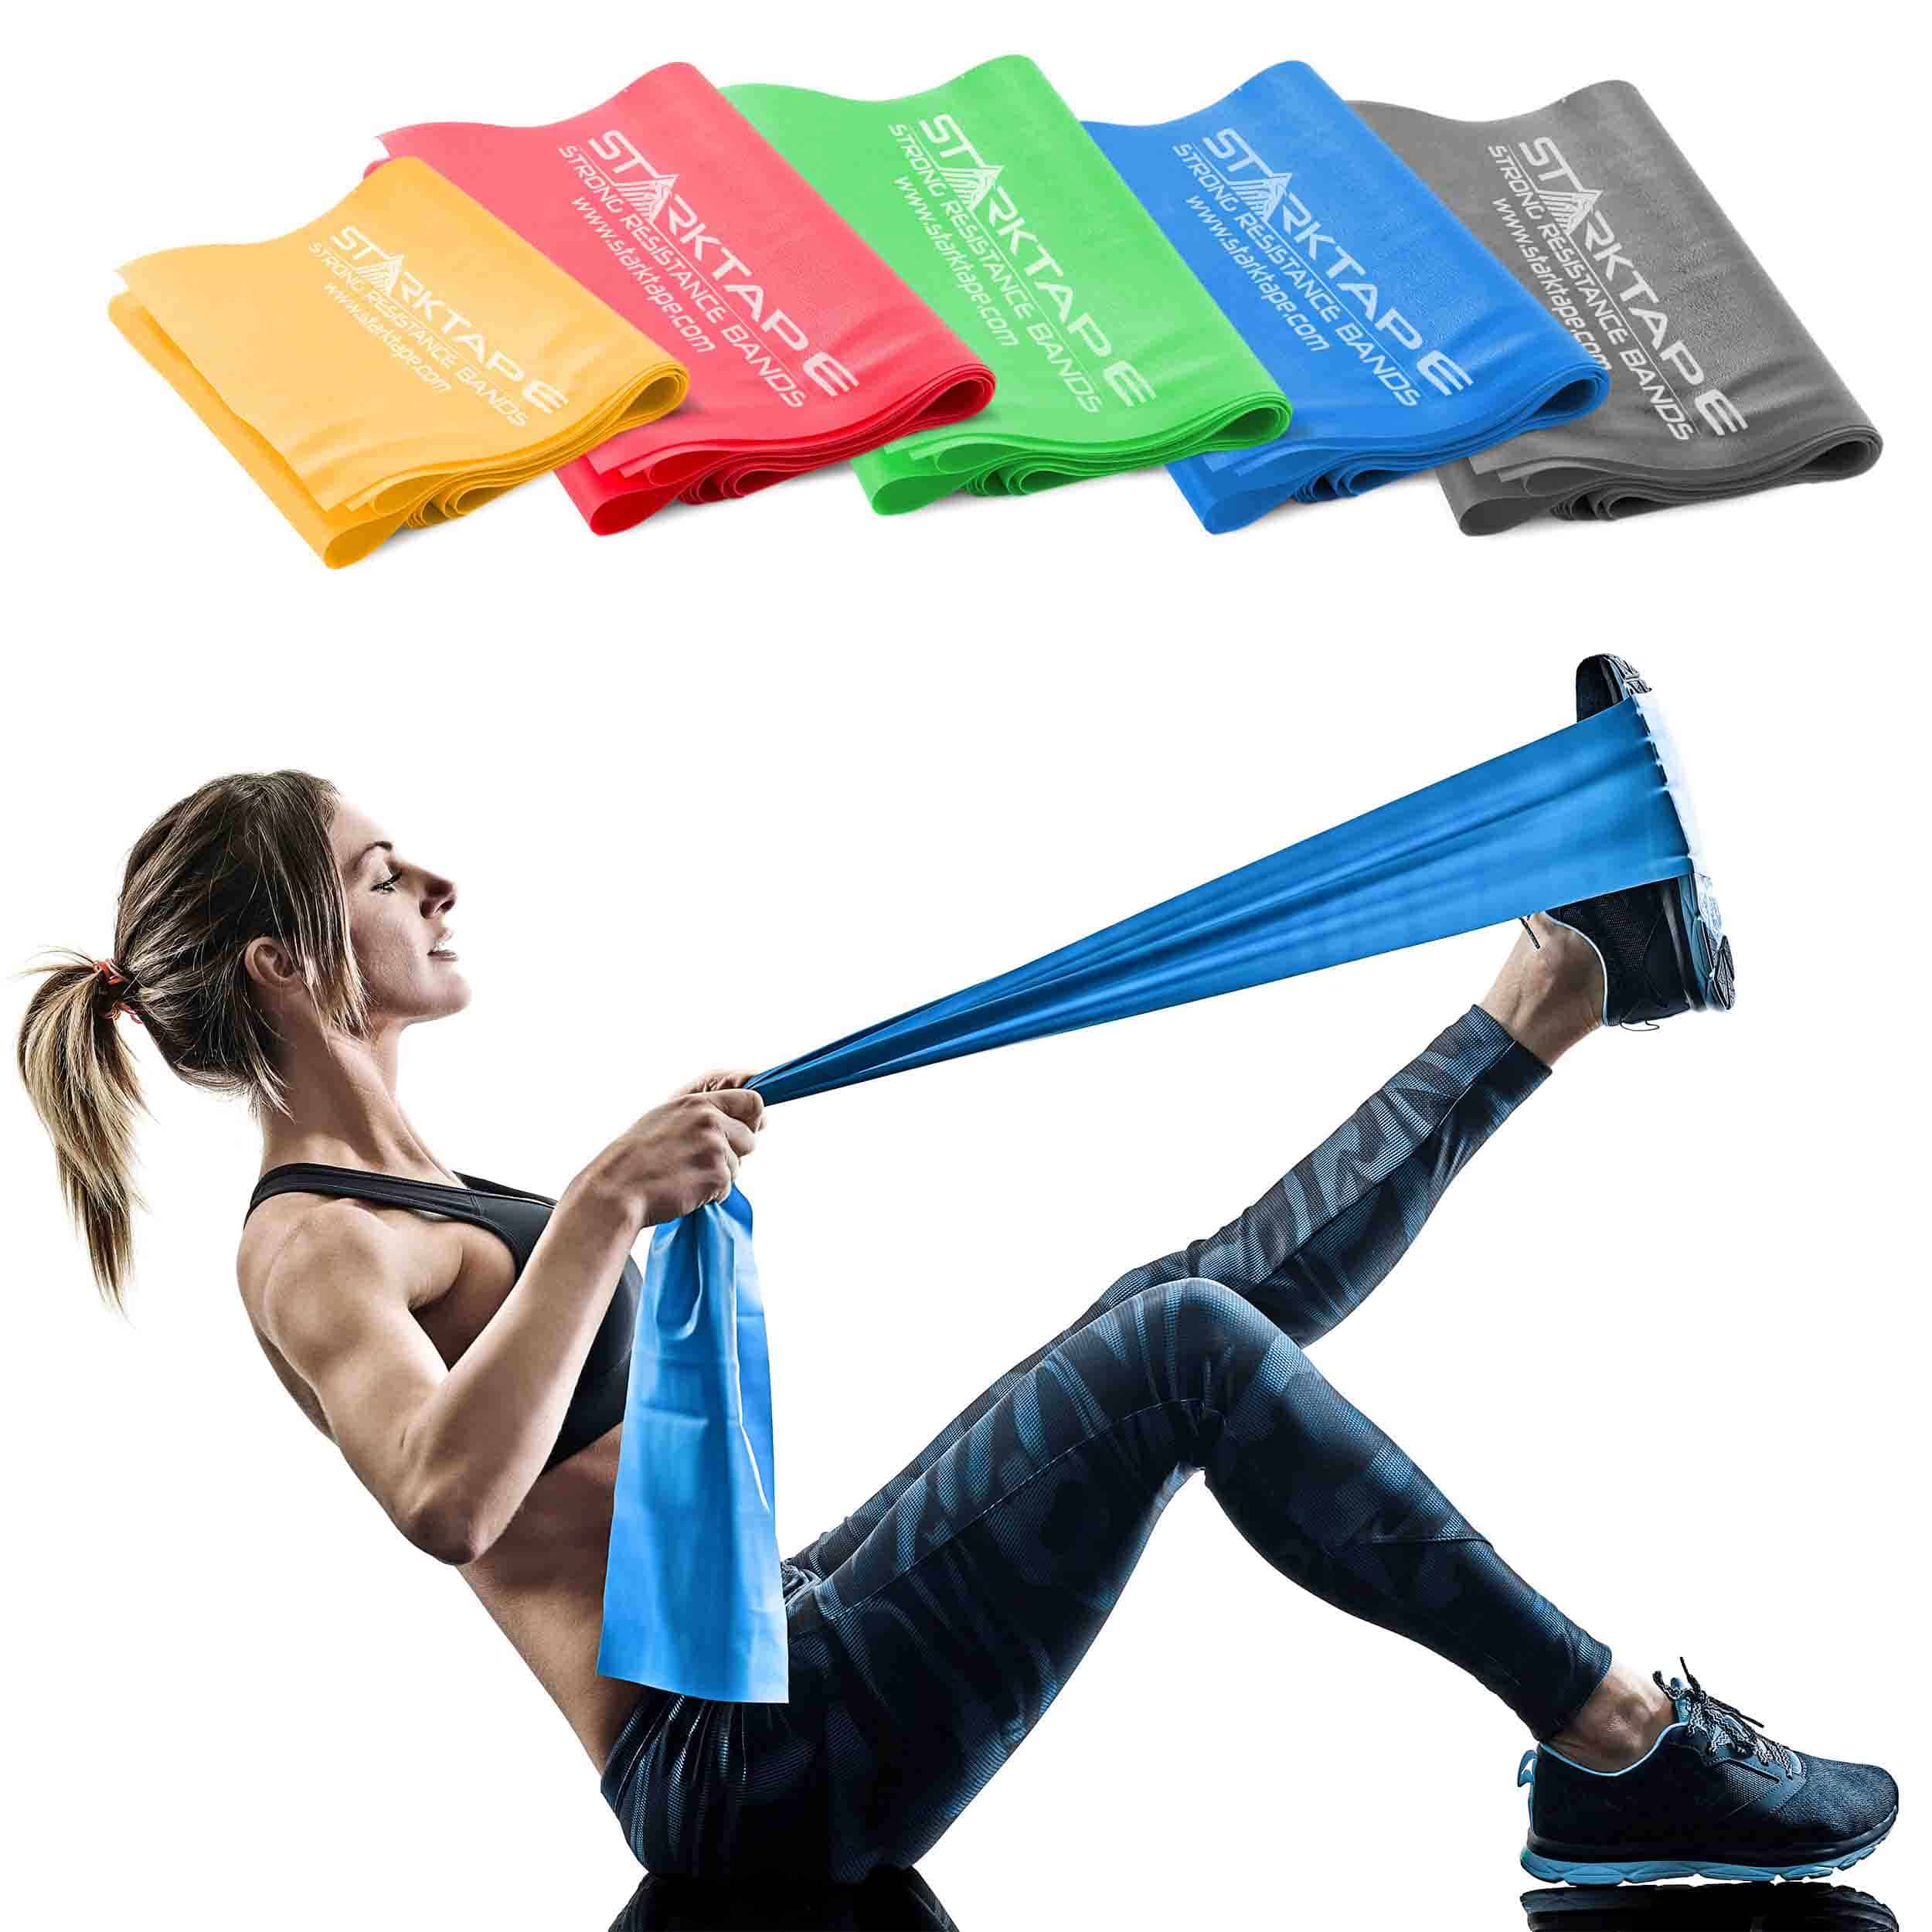 Resistance band workout. Set of 5 Professional Non-Latex exercise